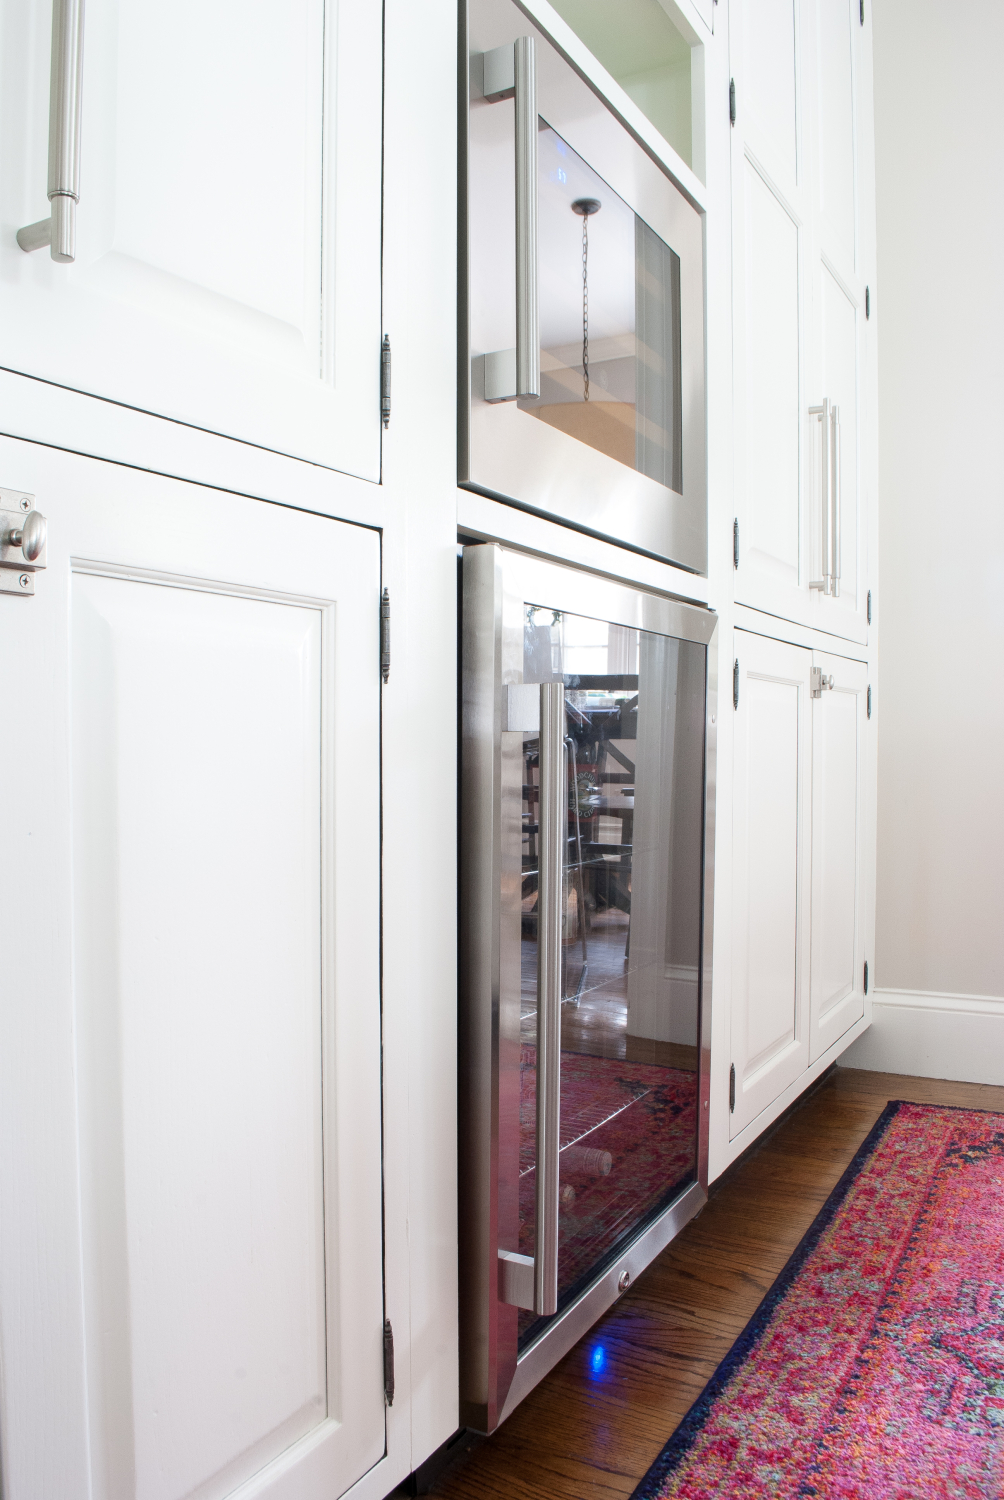 How to add a built in wine fridge and beverage fridge to existing cabinetry - it's simpler than you might think and adds great extra cold storage!